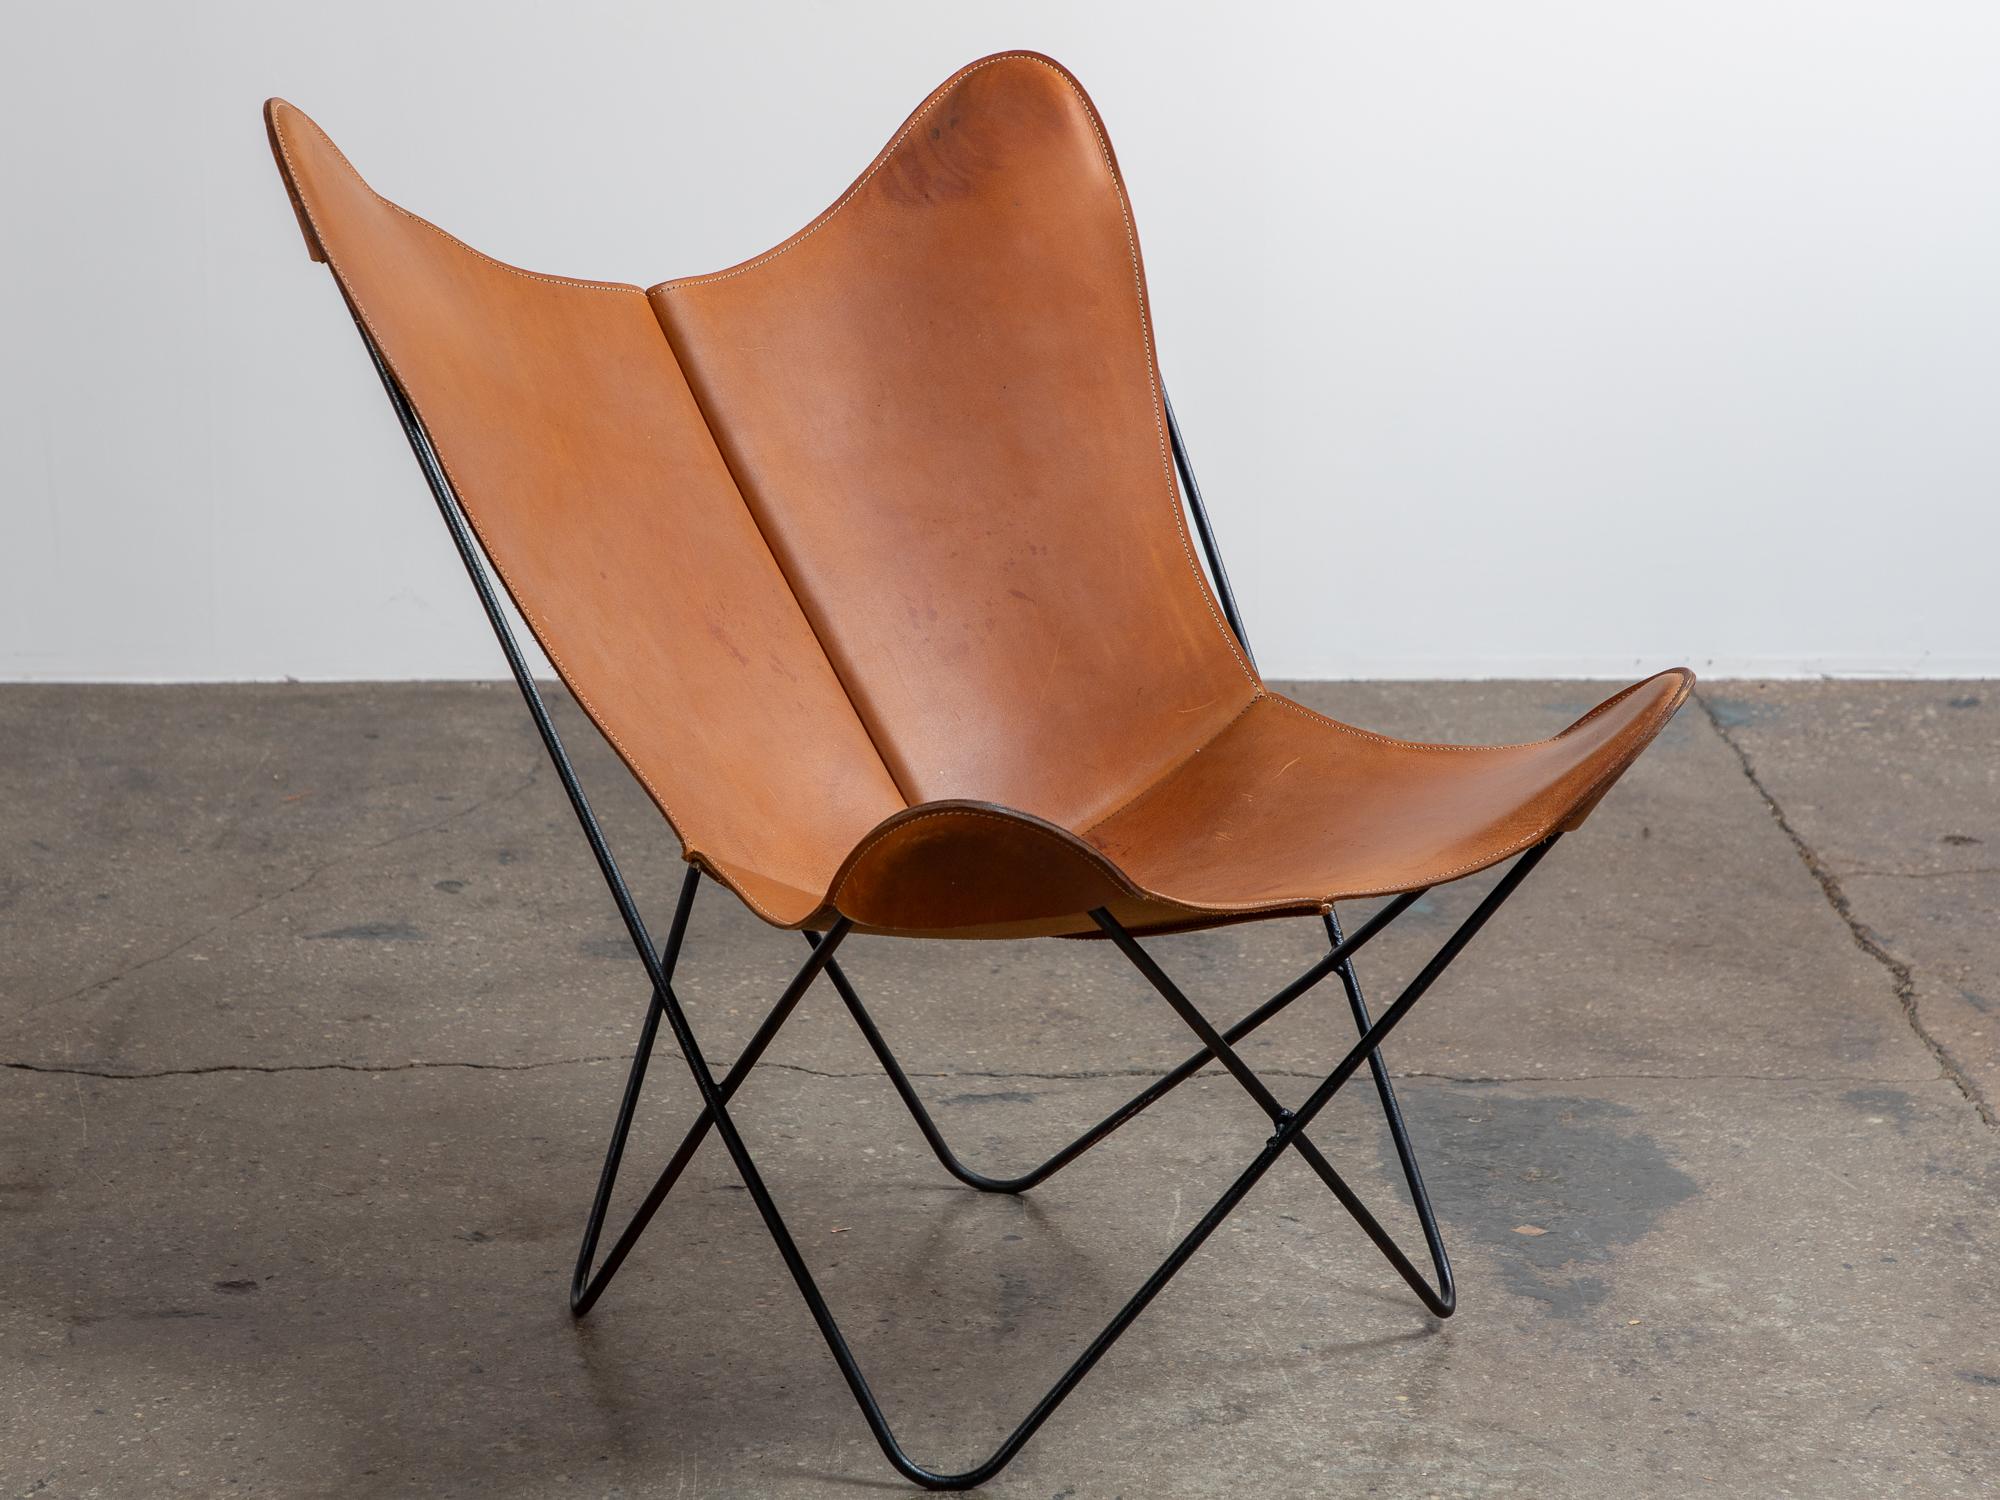 Vintage Butterfly Chair with tan leather sling, designed by Antonio Bonet, Juan Kurchan & Jorge Ferrari-Hardoy, issued by Knoll. An iconic mid-century design with a relaxed and rugged vibe. The chair's distinctive look comes from a leather sling